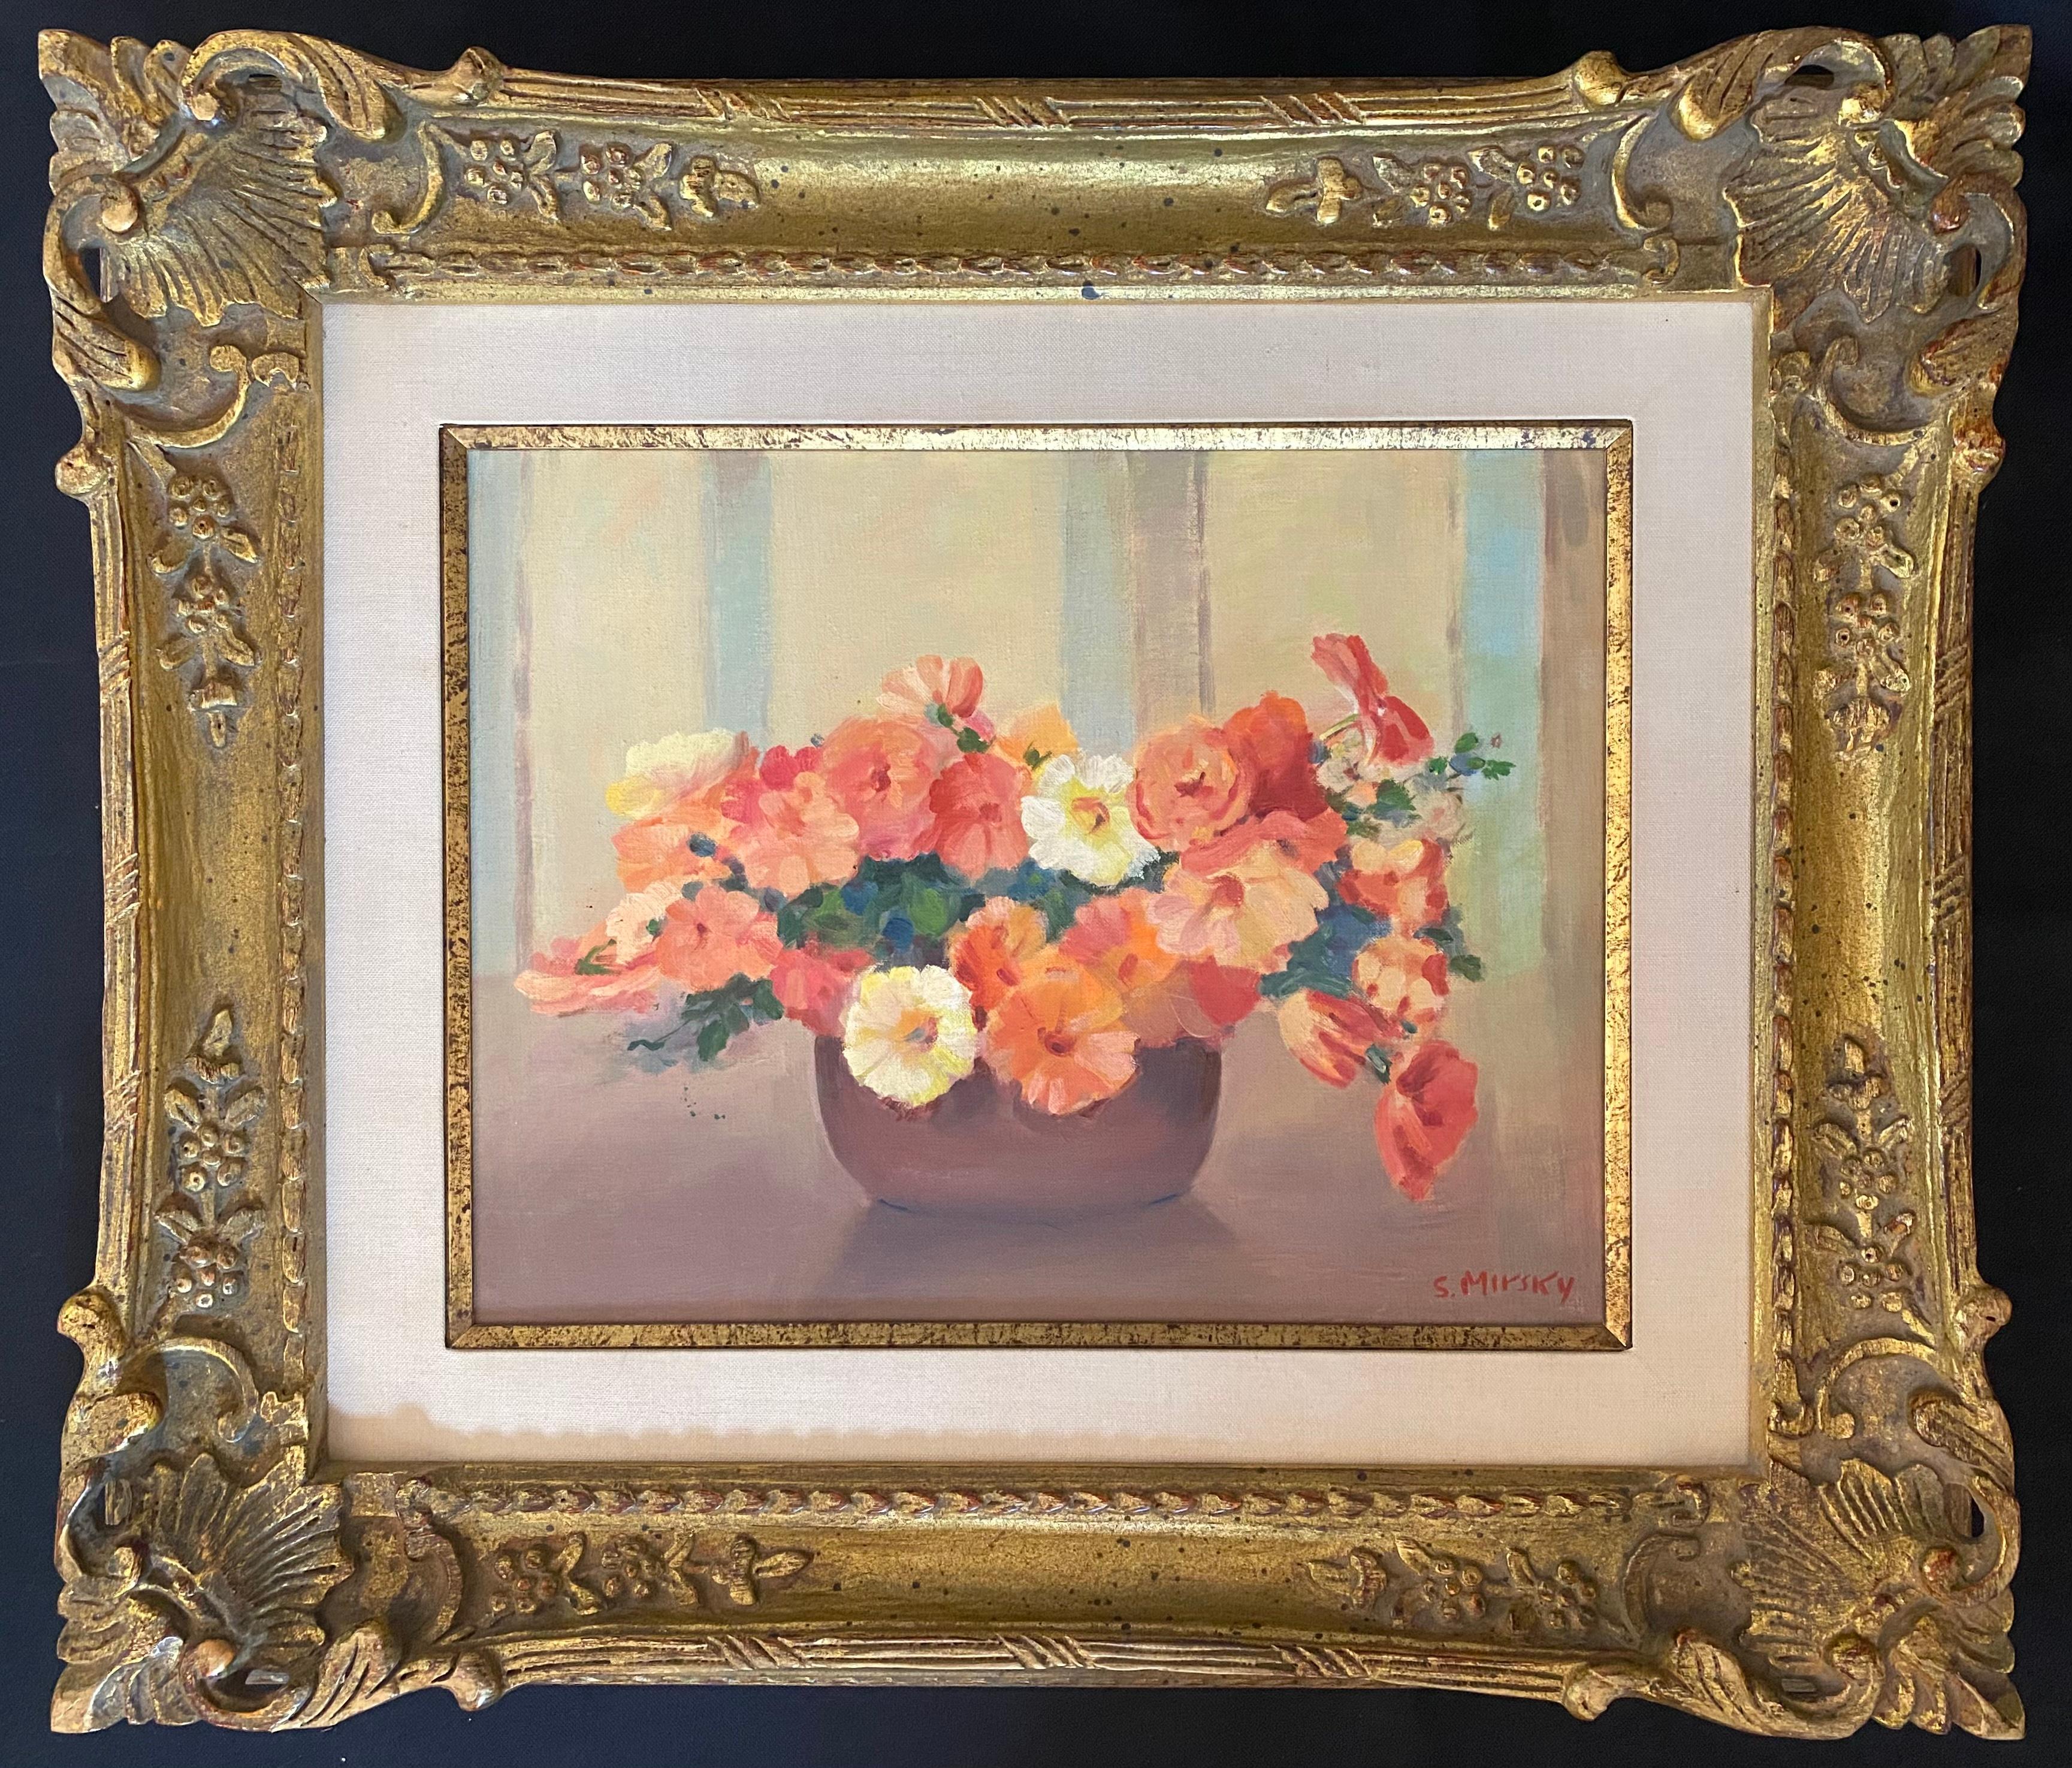 “Bouquet of Petunias” - Painting by SAMUEL MIRSKY